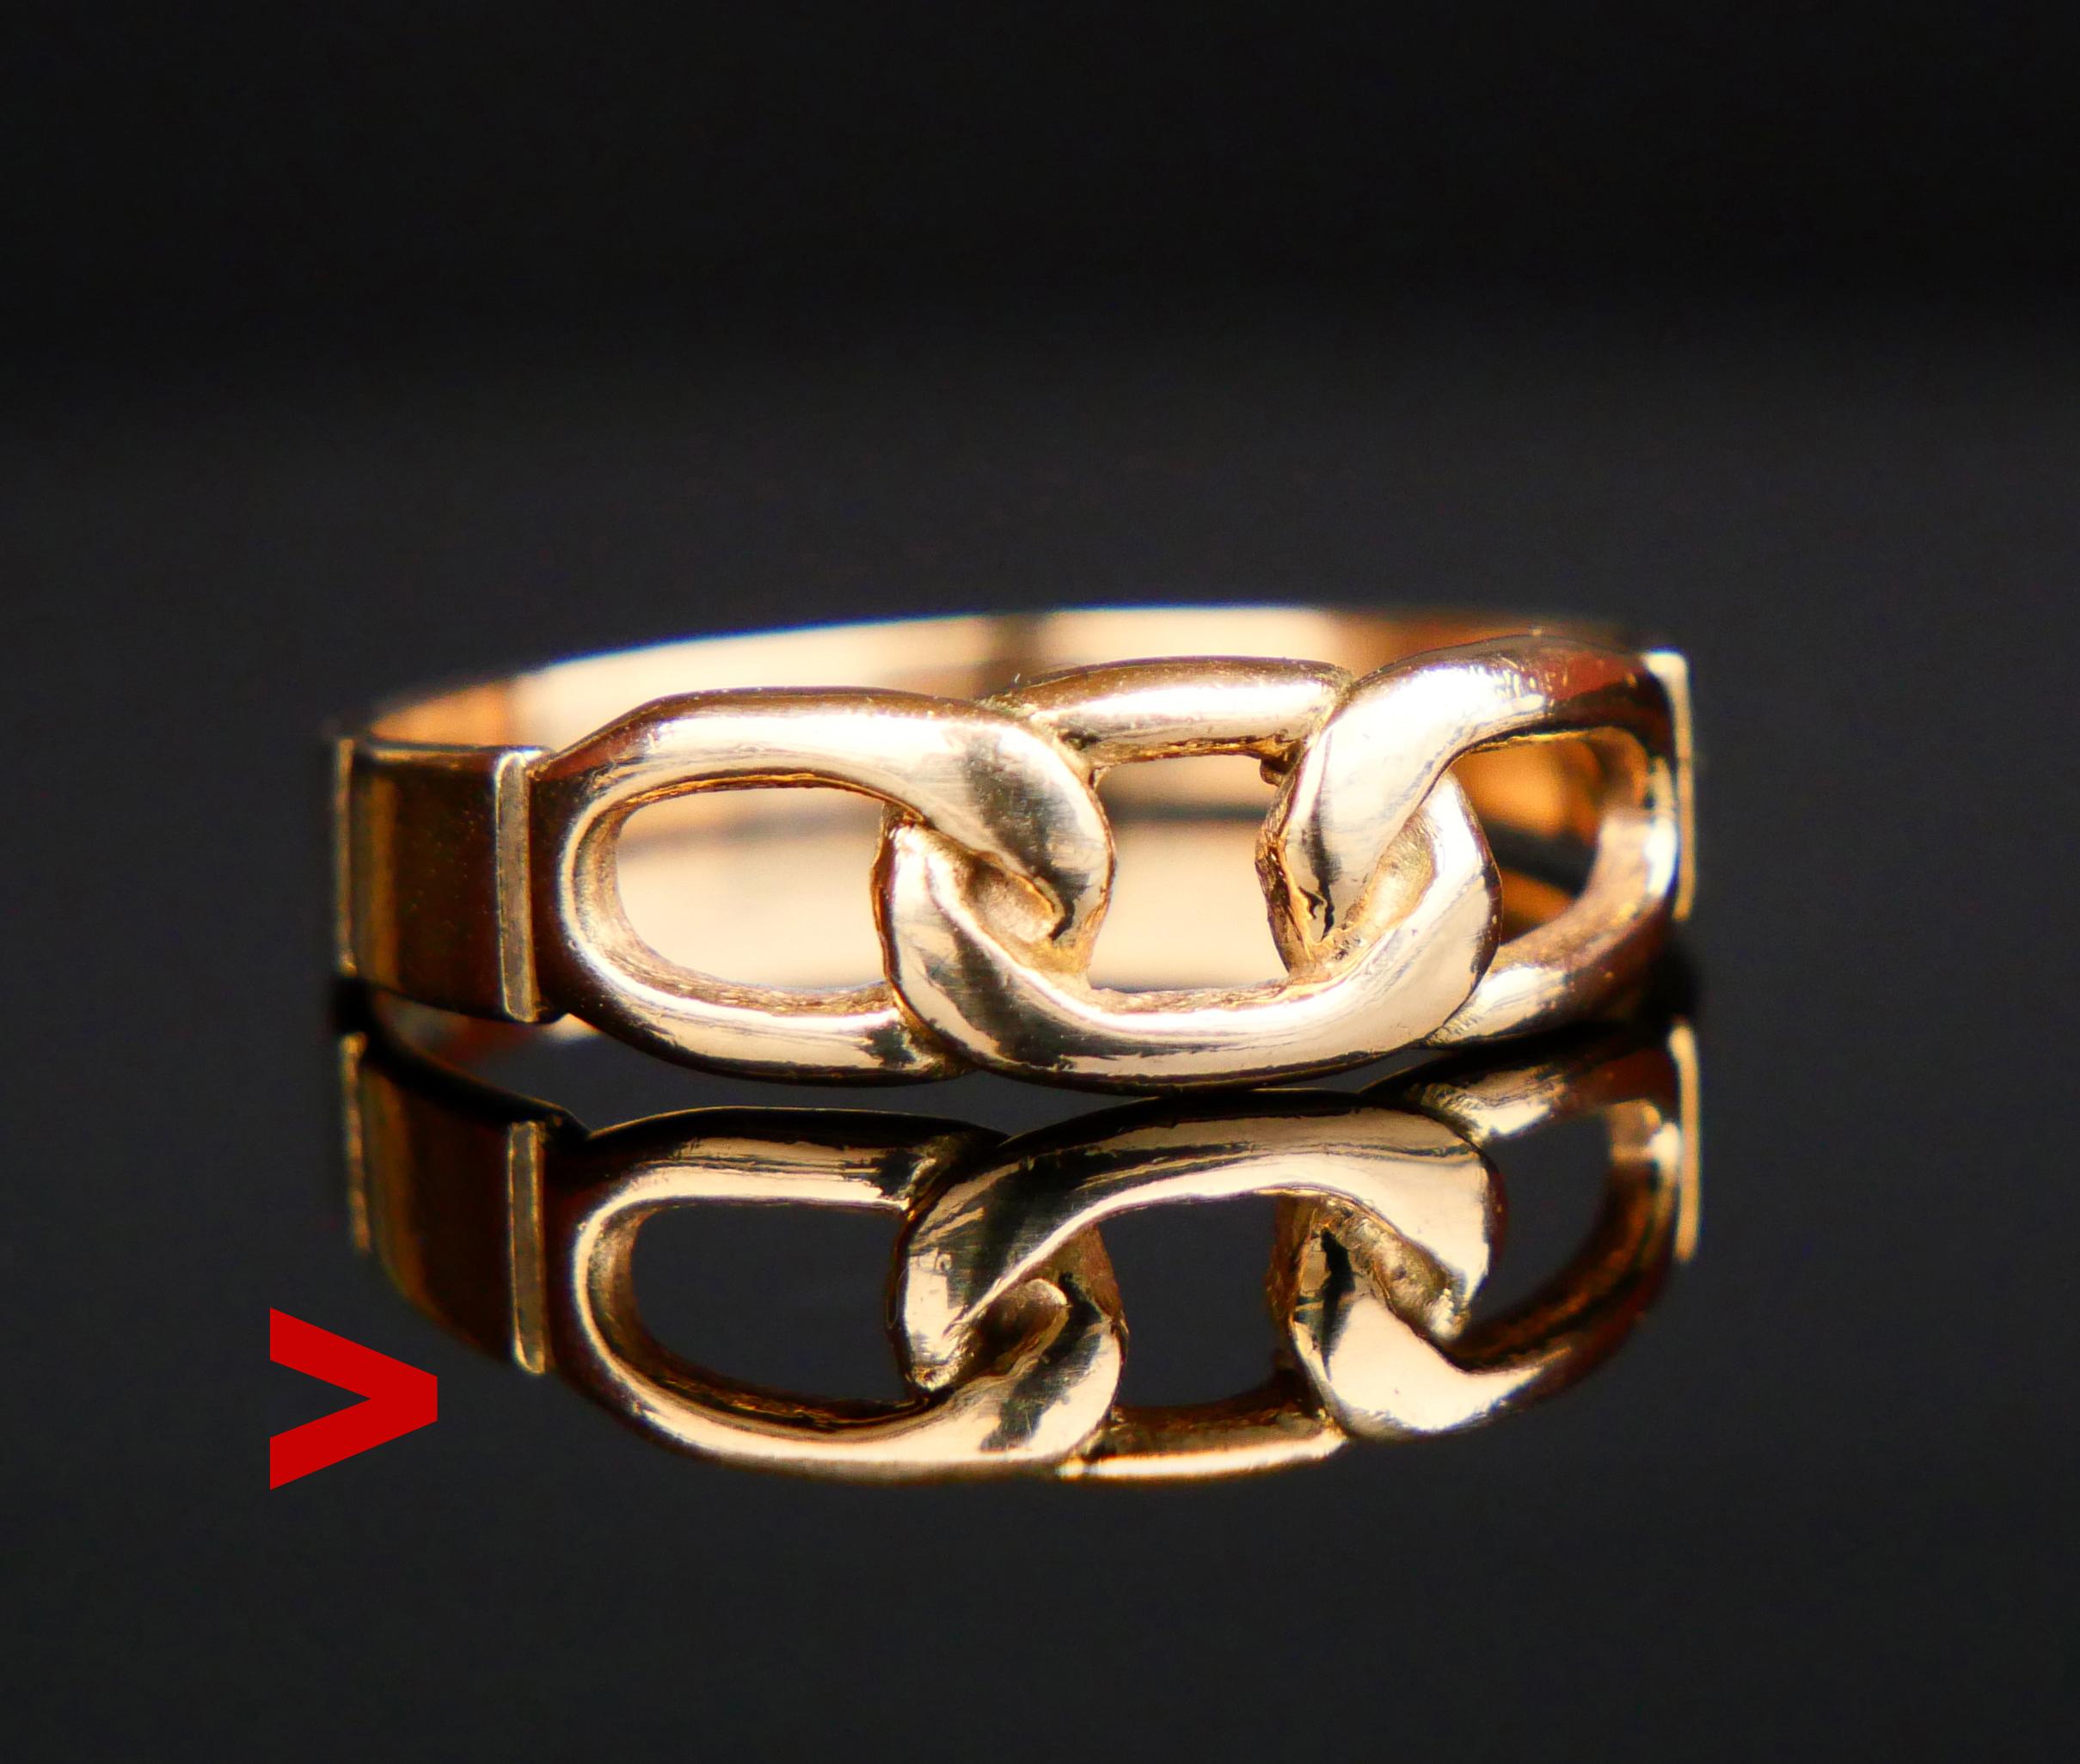 Freemason's ring in solid 18K Yellow Gold featuring three chained links that slightly curve. The three-link chain is the main symbol of the Independent Order of Odd Fellows, most likely this ring used to belong to one of members of that